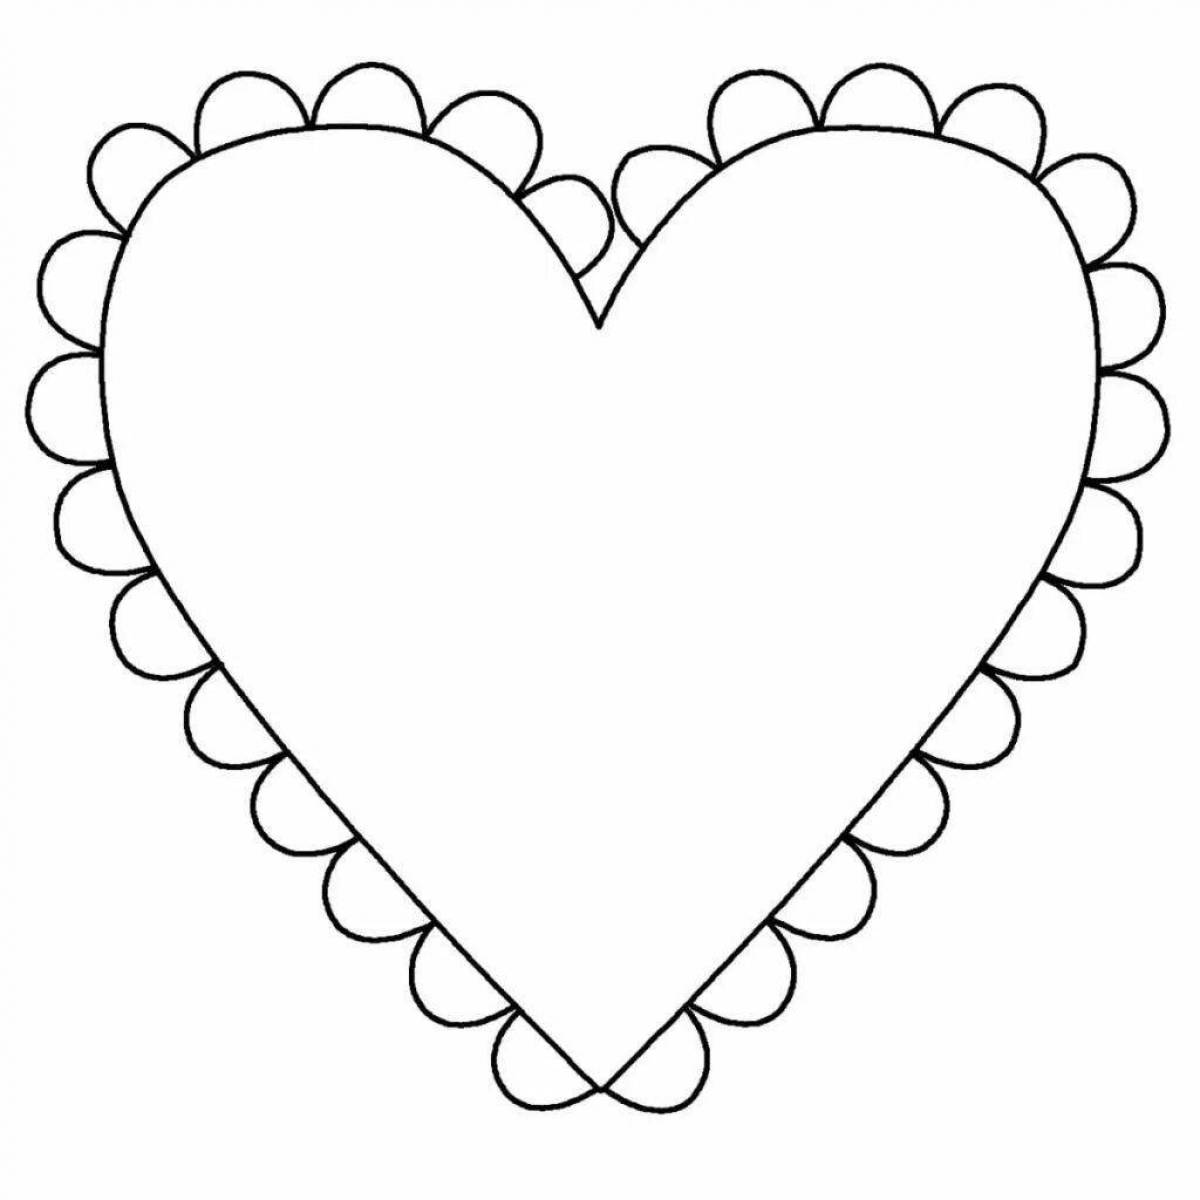 Attractive heart coloring page